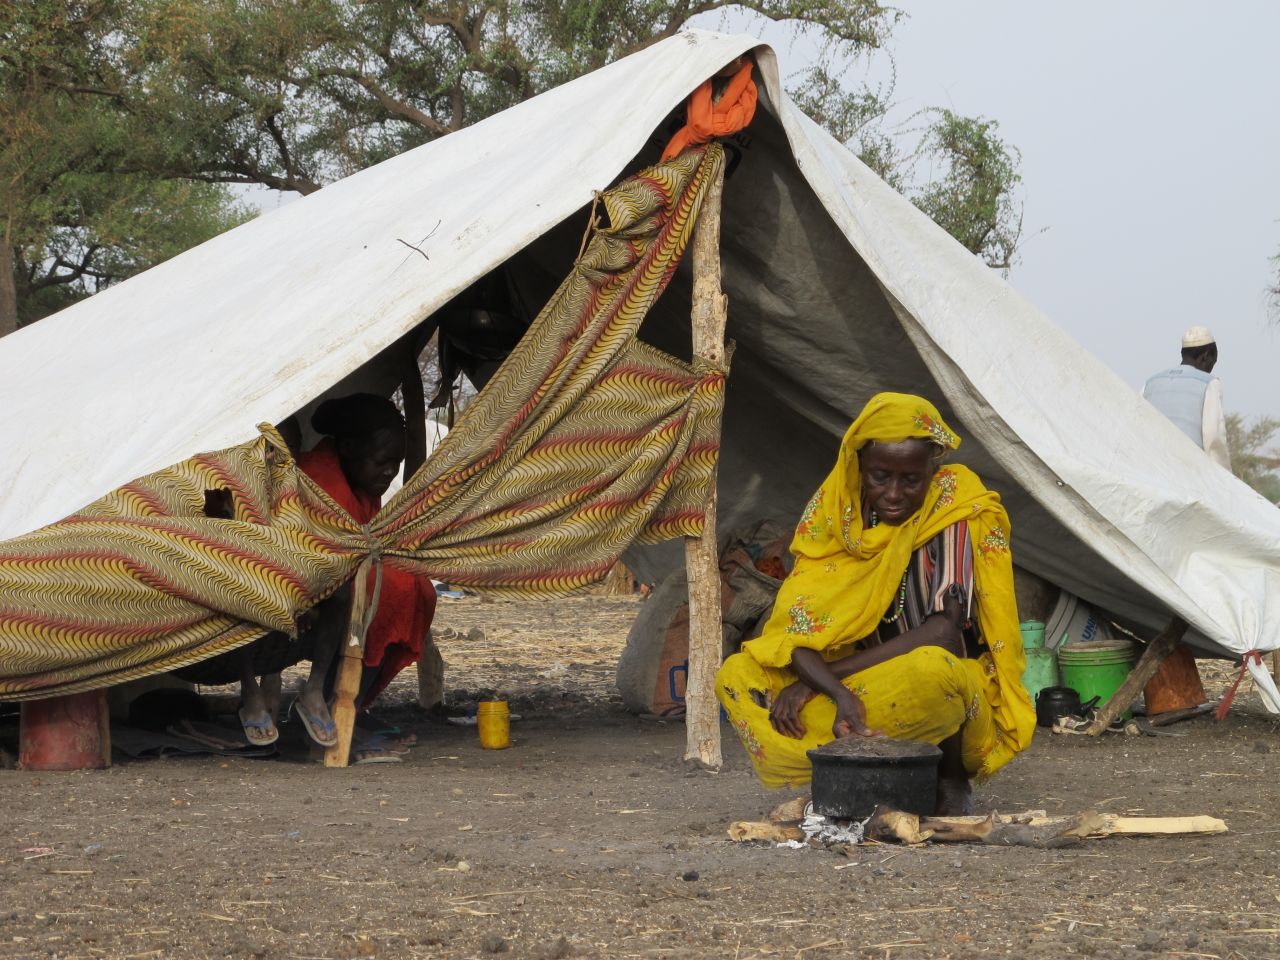 Thousands of people fleeing the bitter conflict in the border areas of Sudan and South Sudan have found a temporary home in the Jamam refugee camp.